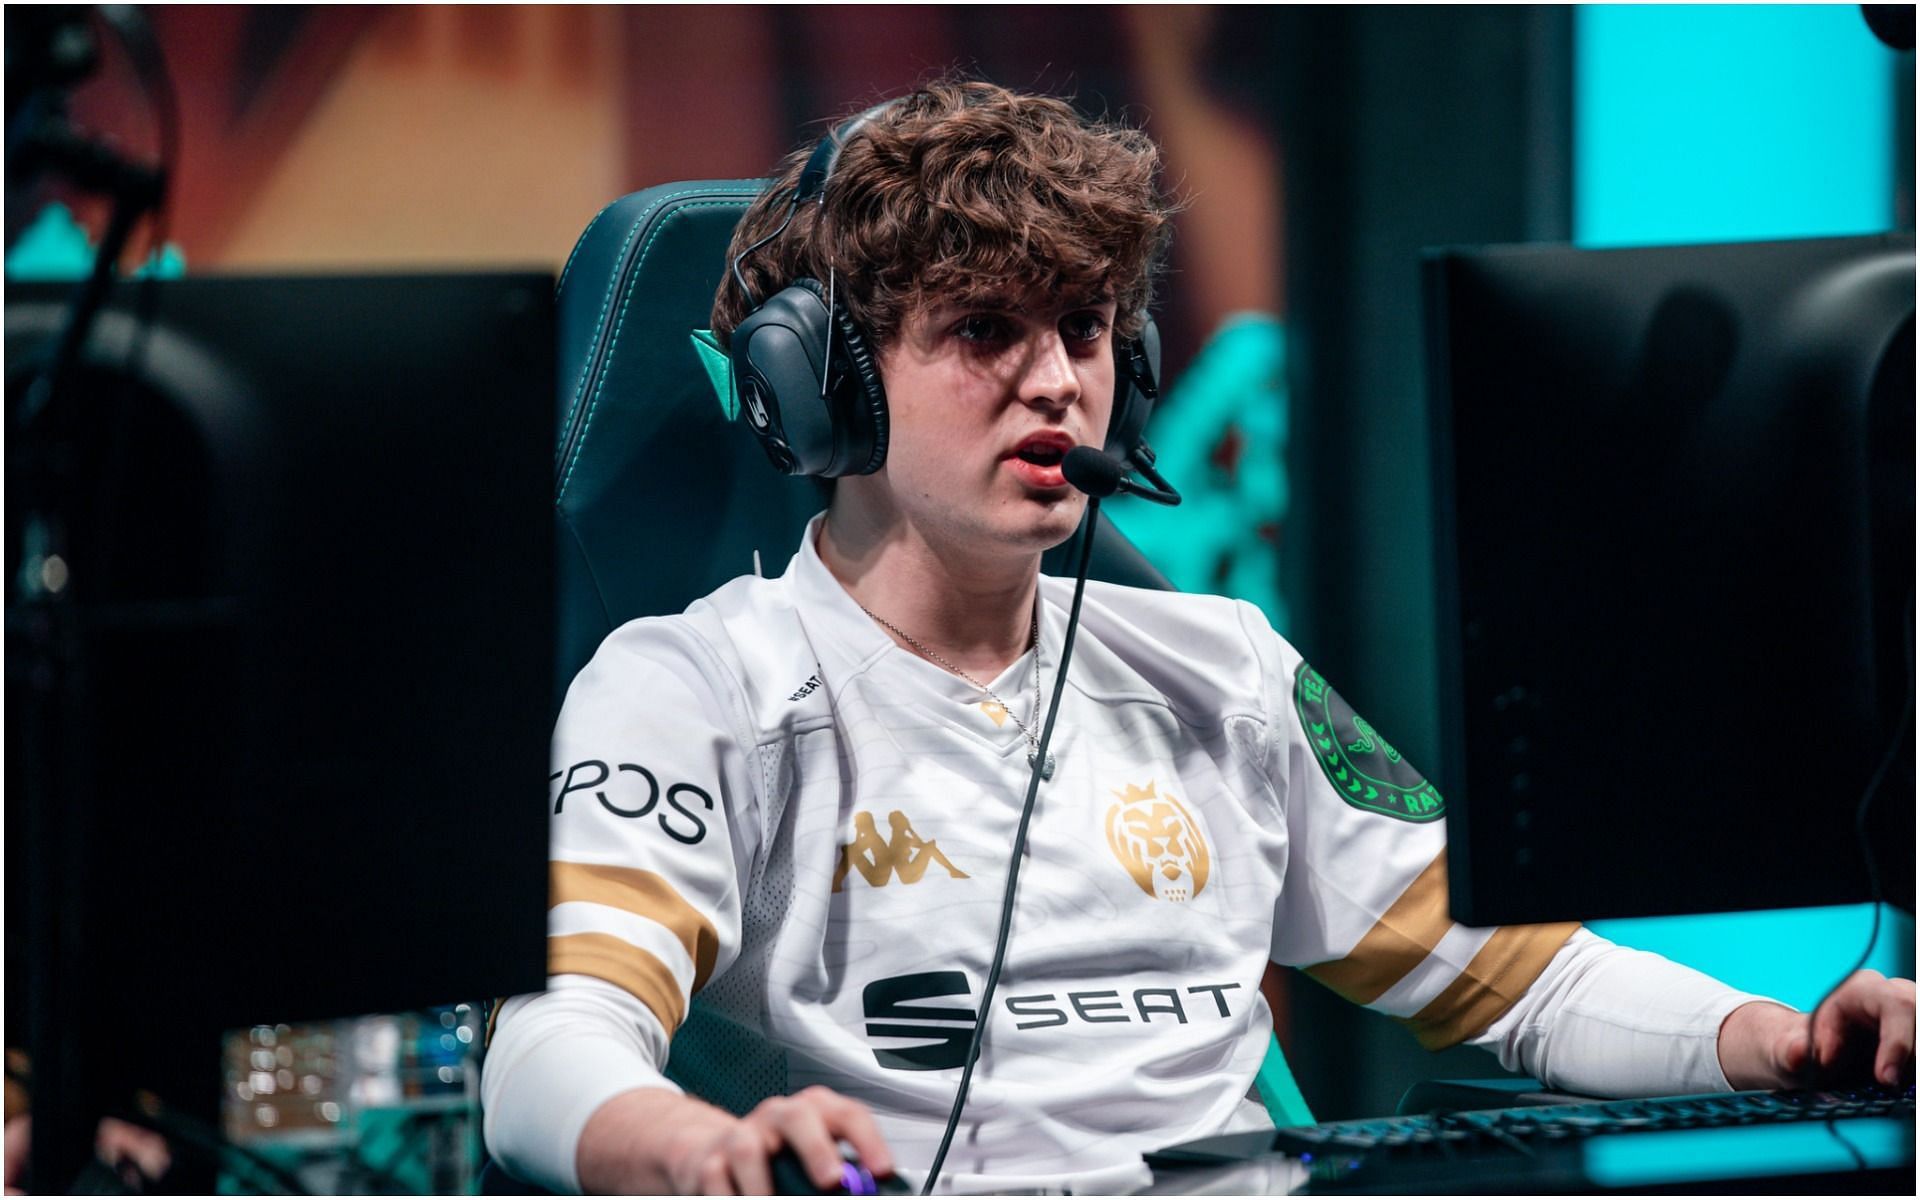 Carzzy receives monumental support from community after criticism from co-owner (Image via League of Legends)